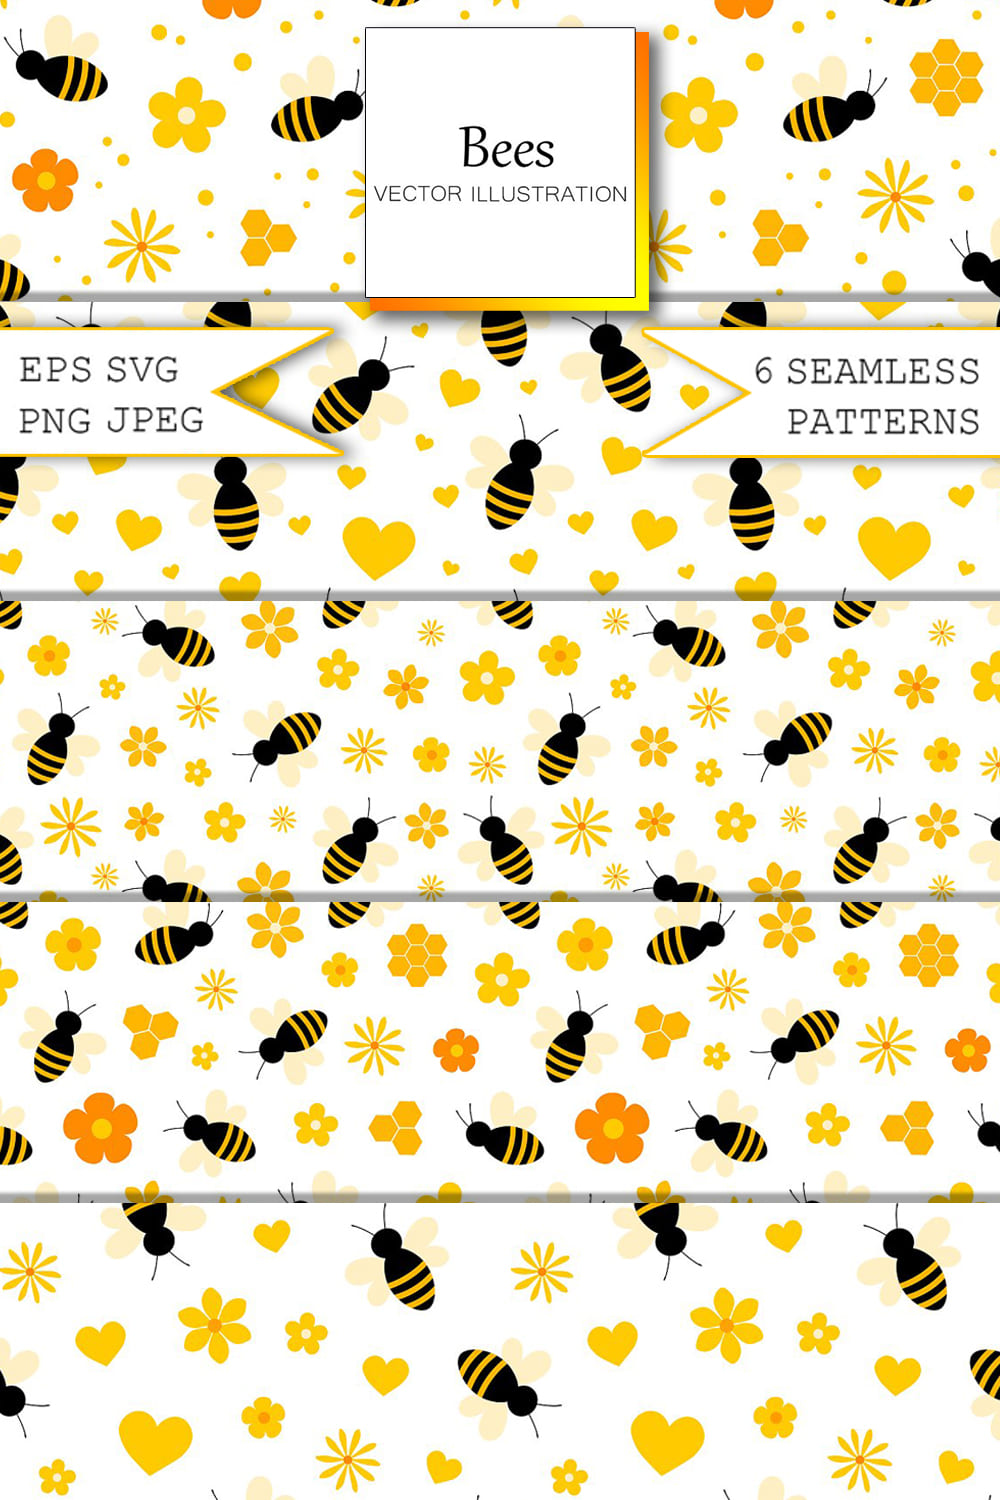 bees pattern. bees background pinterest 1000 1500